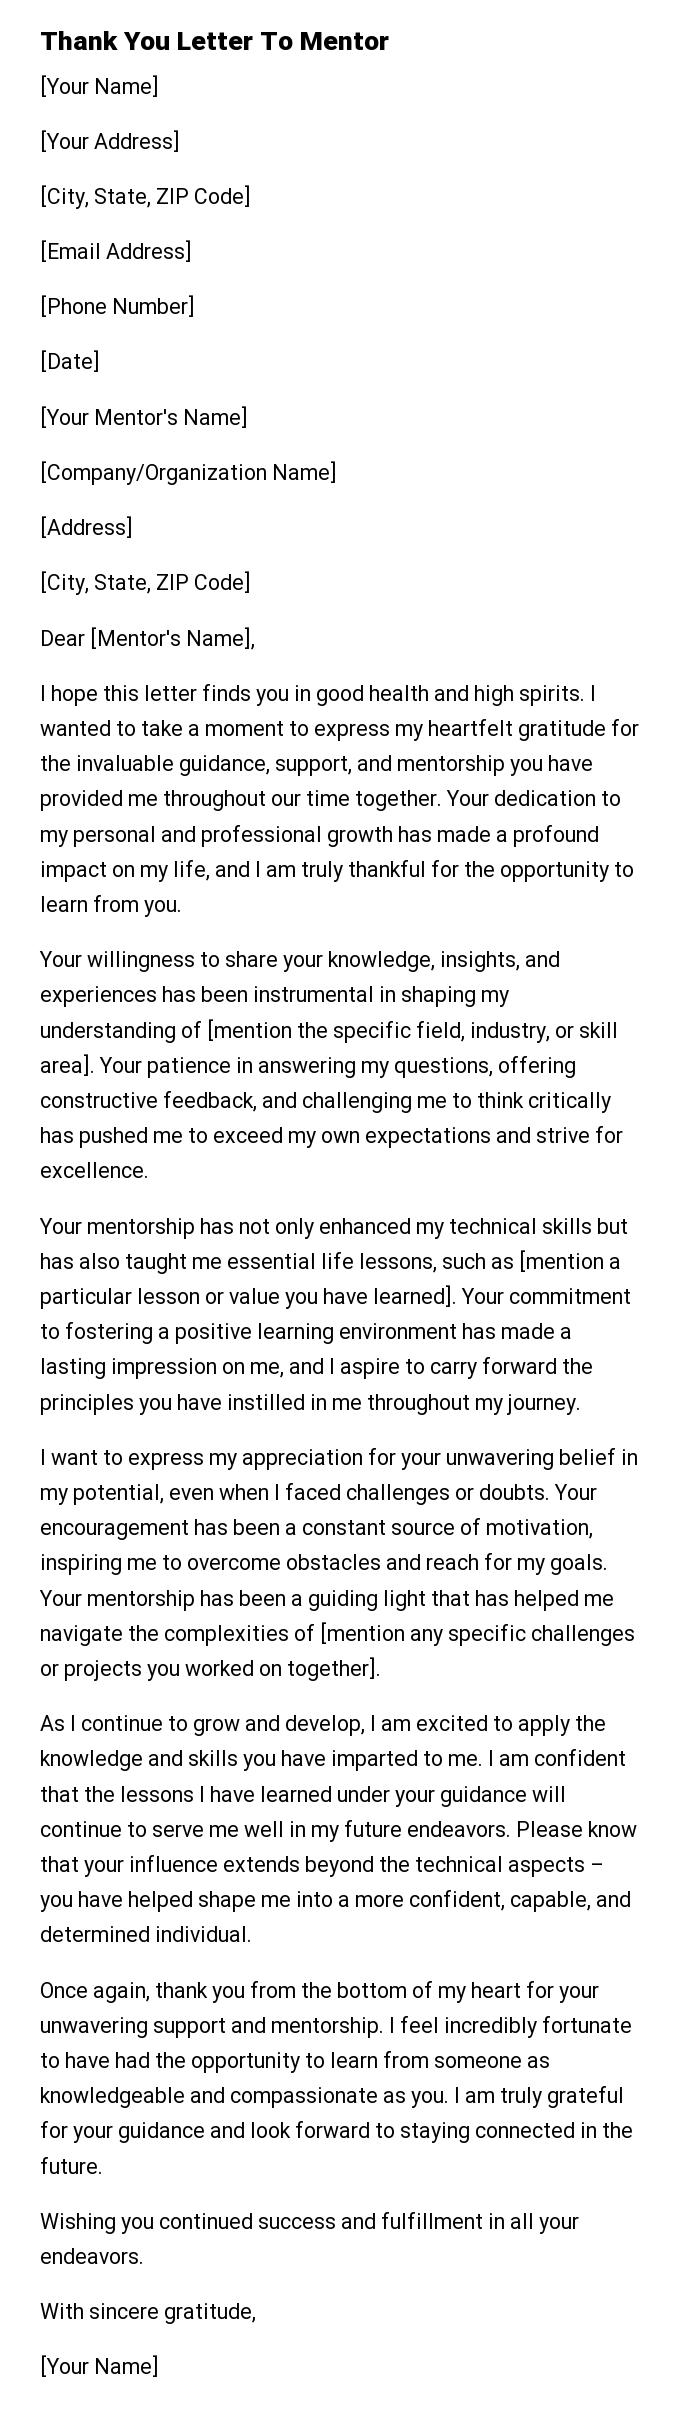 Thank You Letter To Mentor